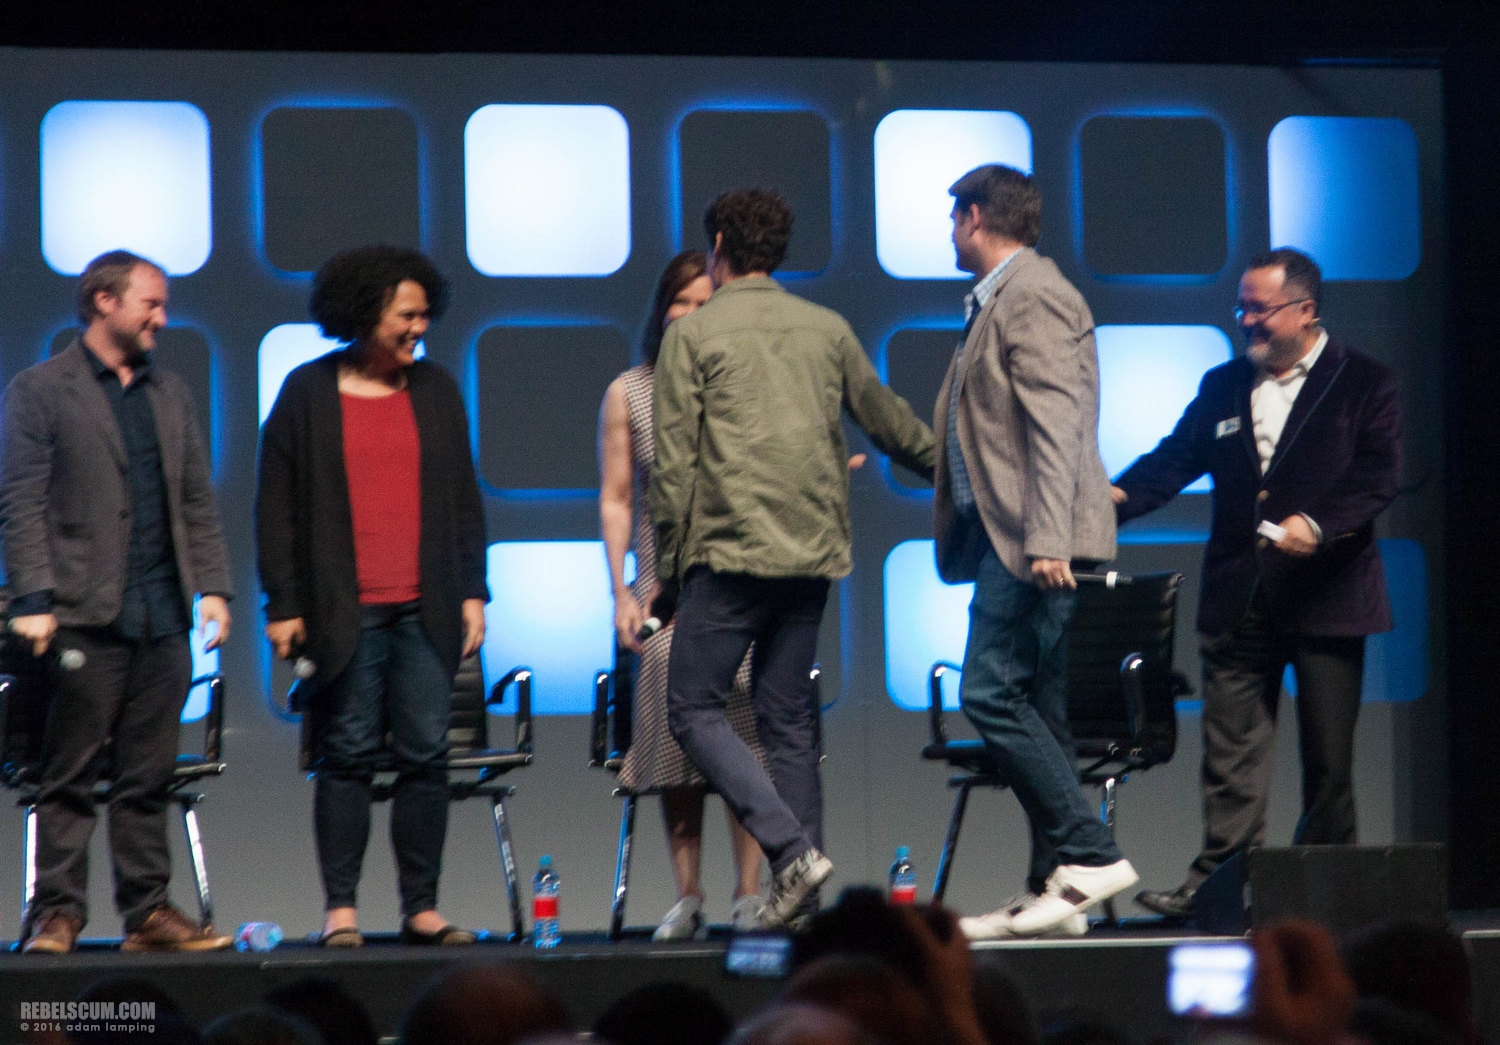 star-wars-celebration-2016-future-filmmakers-and-closing-ceremony-004.jpg